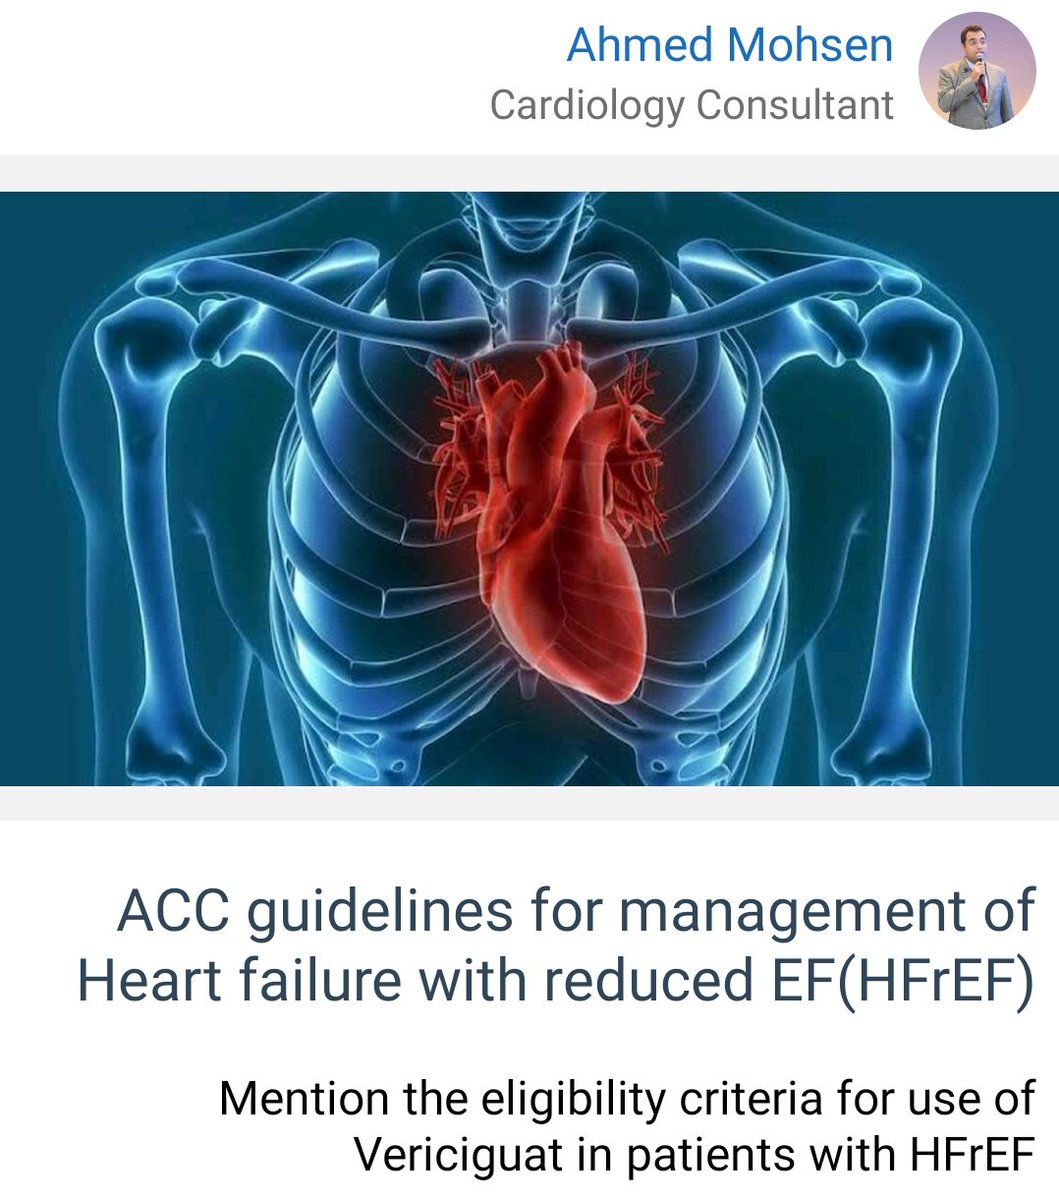 Share your thoughts Vote now in Medshr! The correct answer will be provided in Cardiology Quizzes Medshr group after 24 hours! Join us, post your cases, and enjoy free learning medshr.it/cardioquizzes